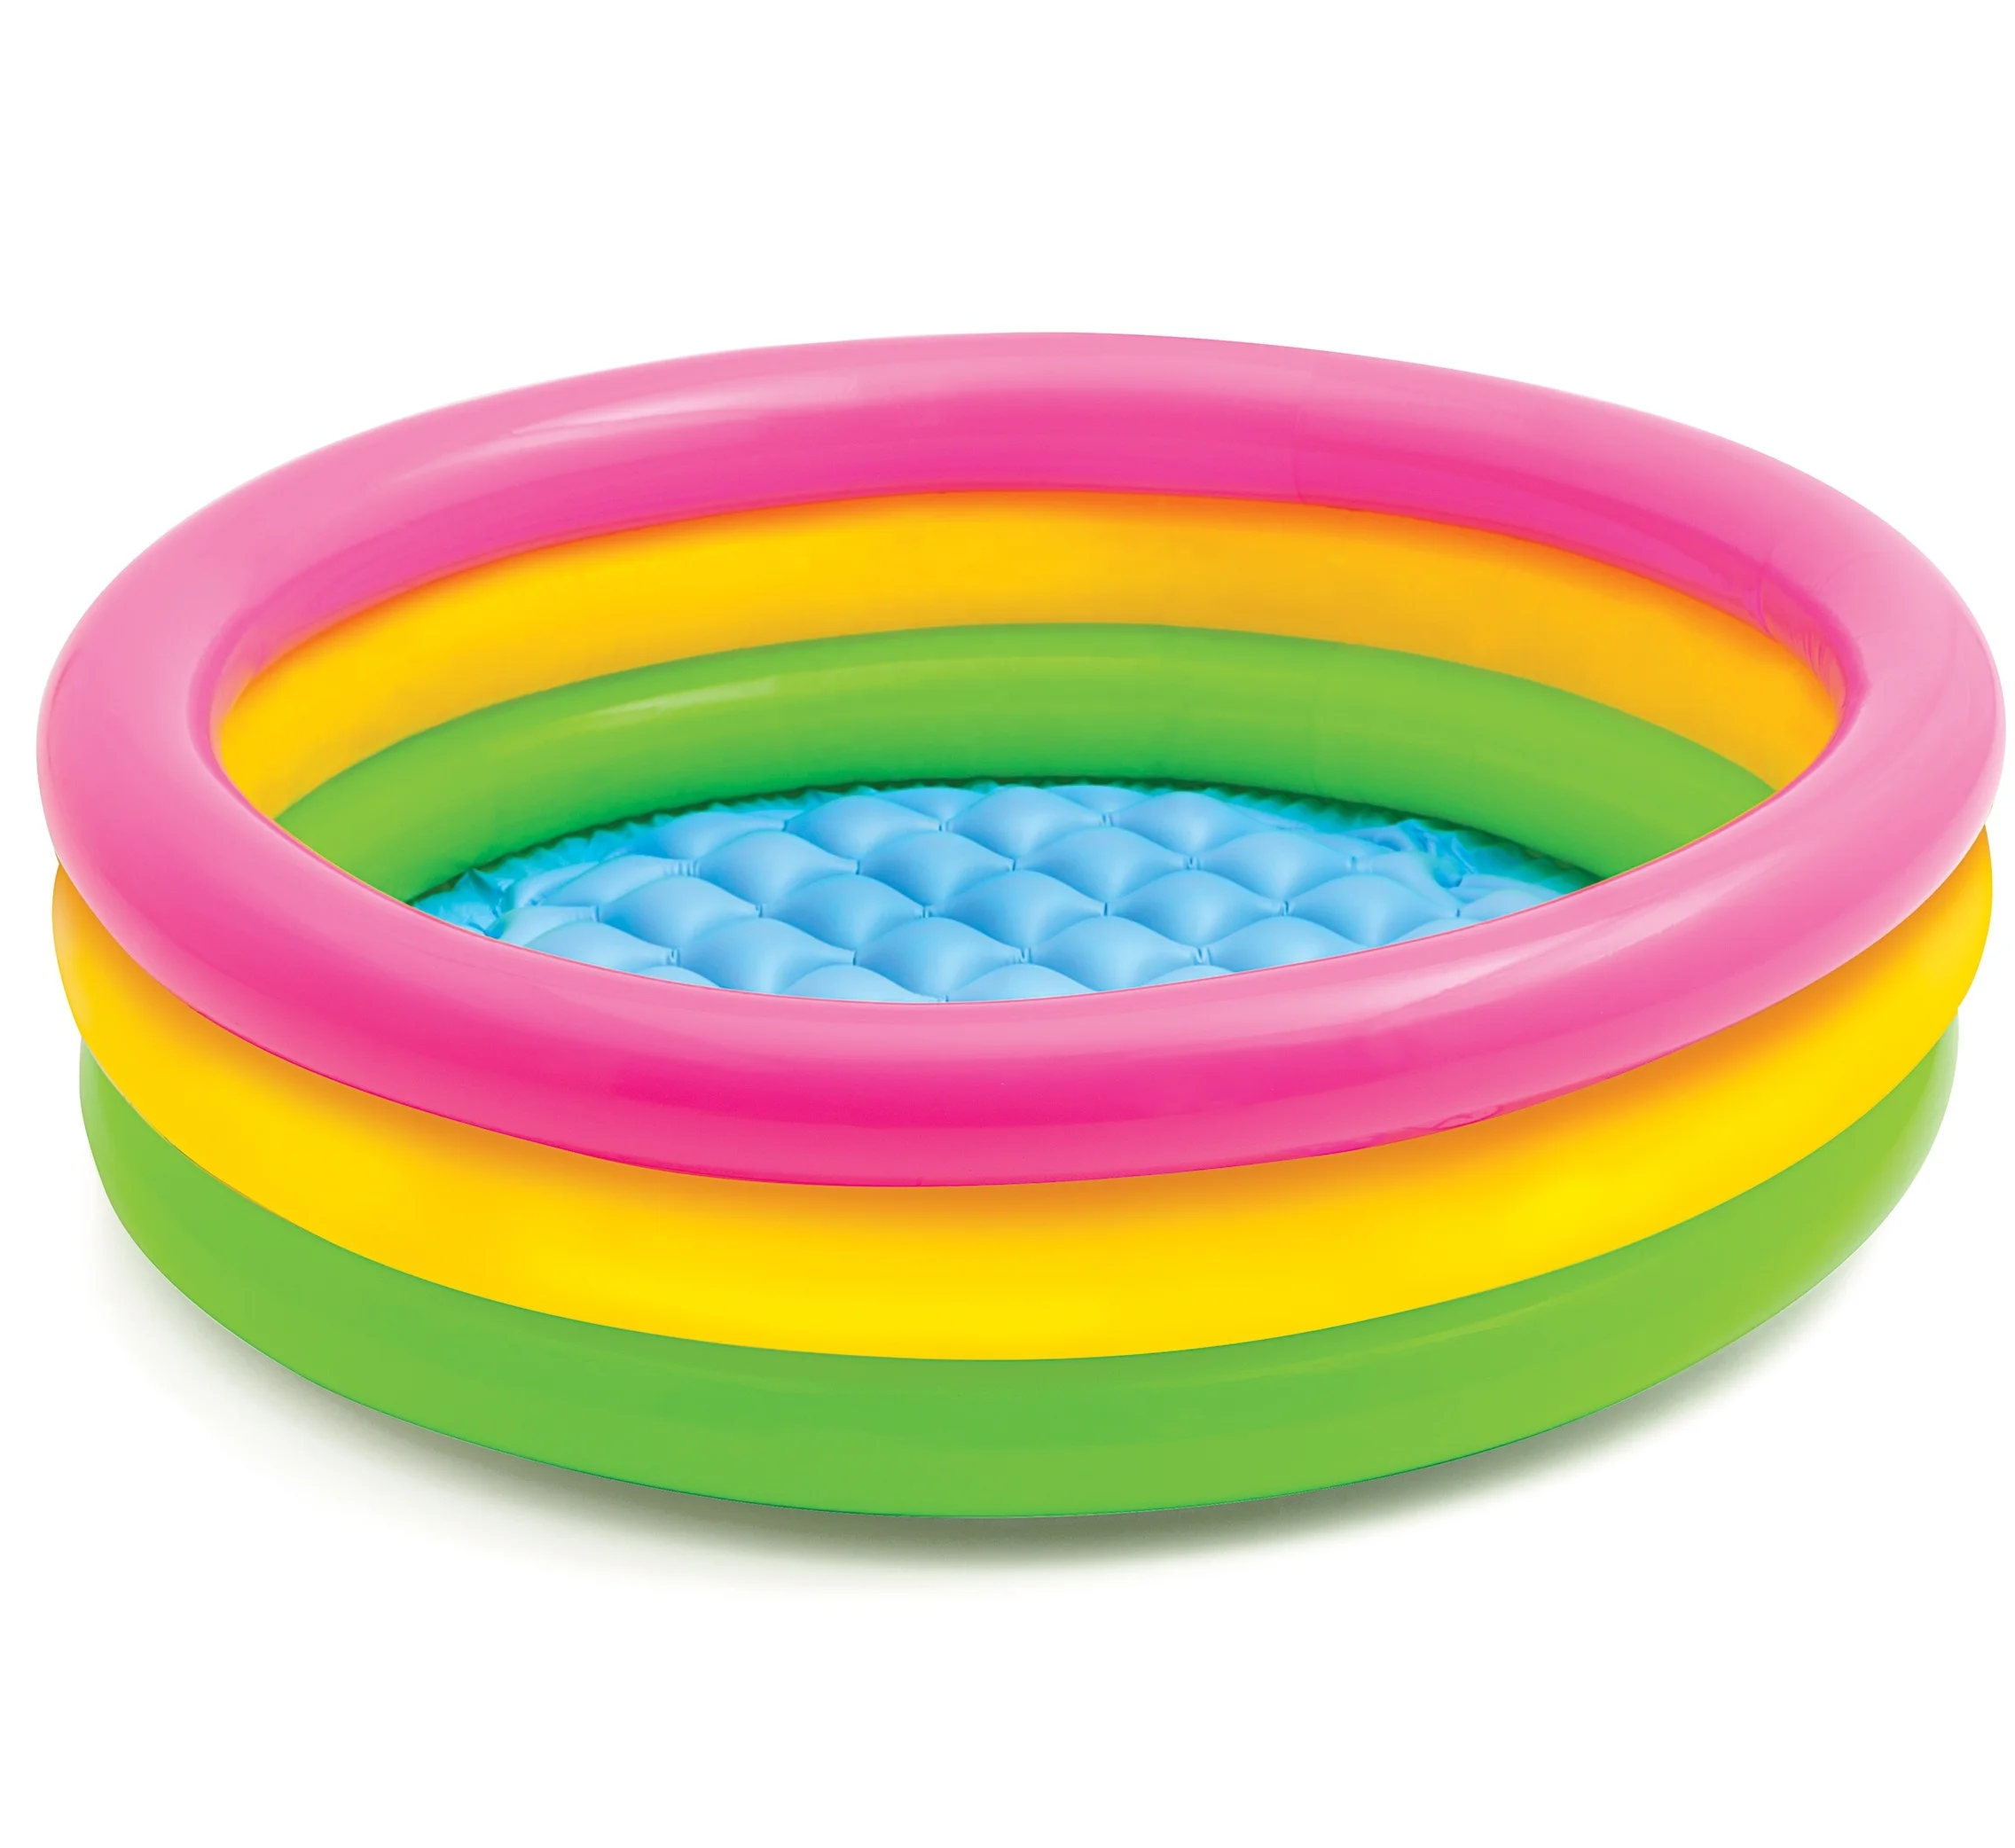 

Intex 58924 Sunset Glow 3 Rings Baby Pool Inflatable Round Colorful Kid Swimming Pool, As picture